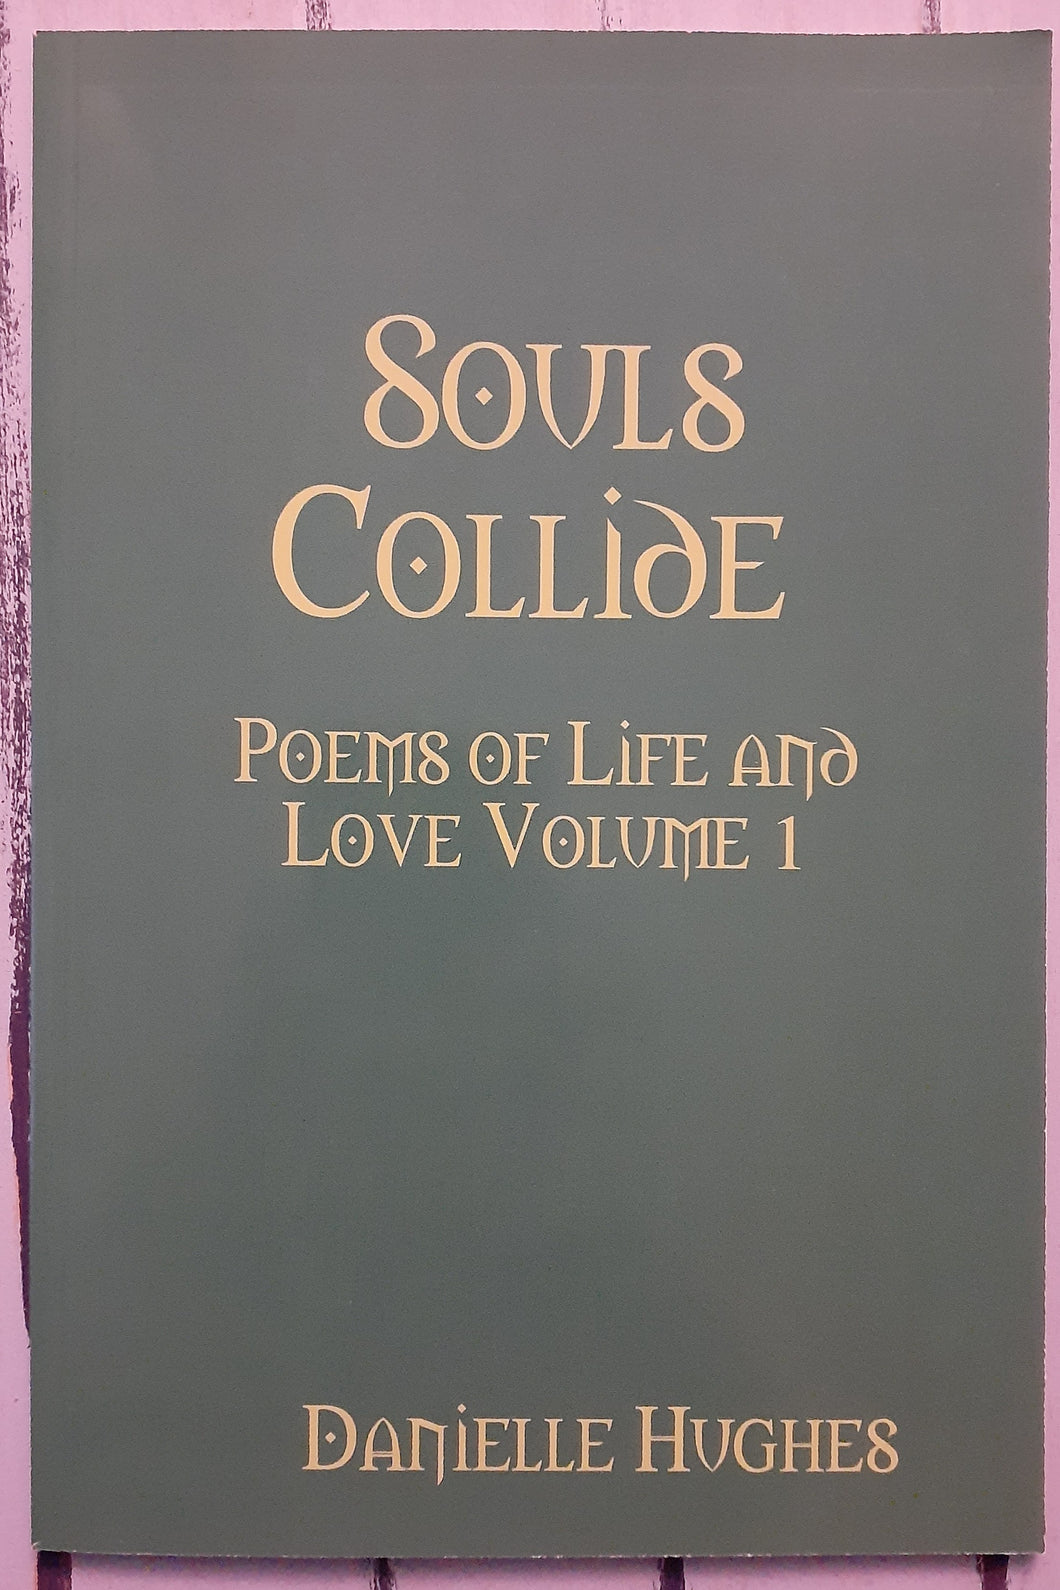 Souls Collide - Poems of Life and Love Volume 1